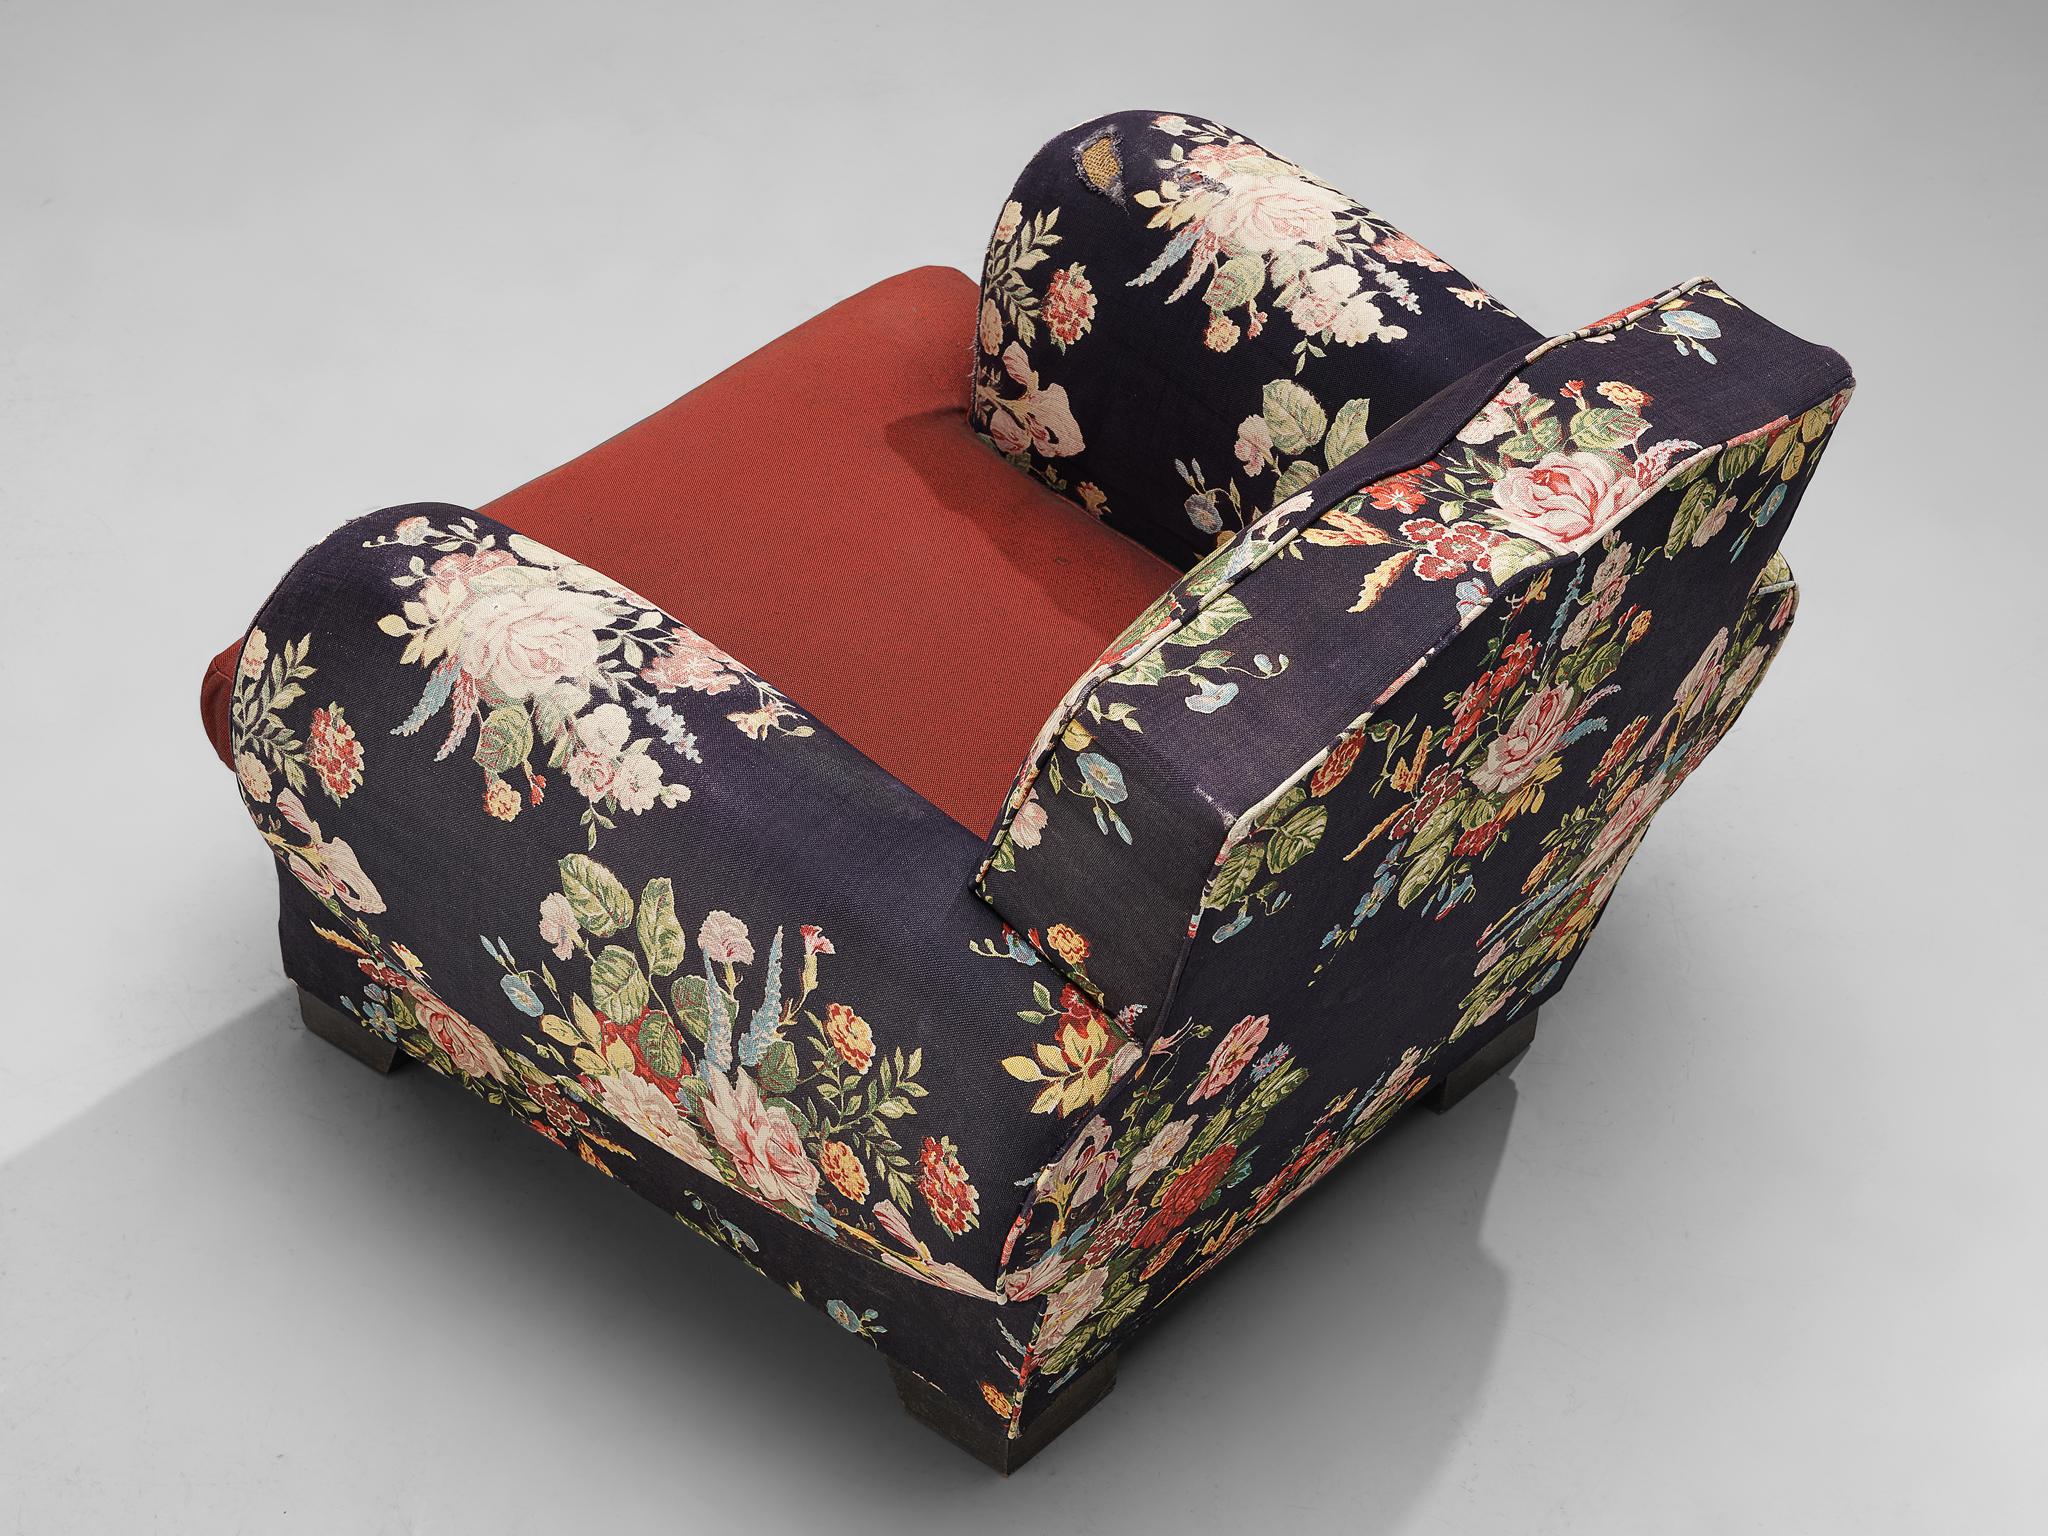 French Art Deco Pair of Lounge Chairs in Floral Upholstery